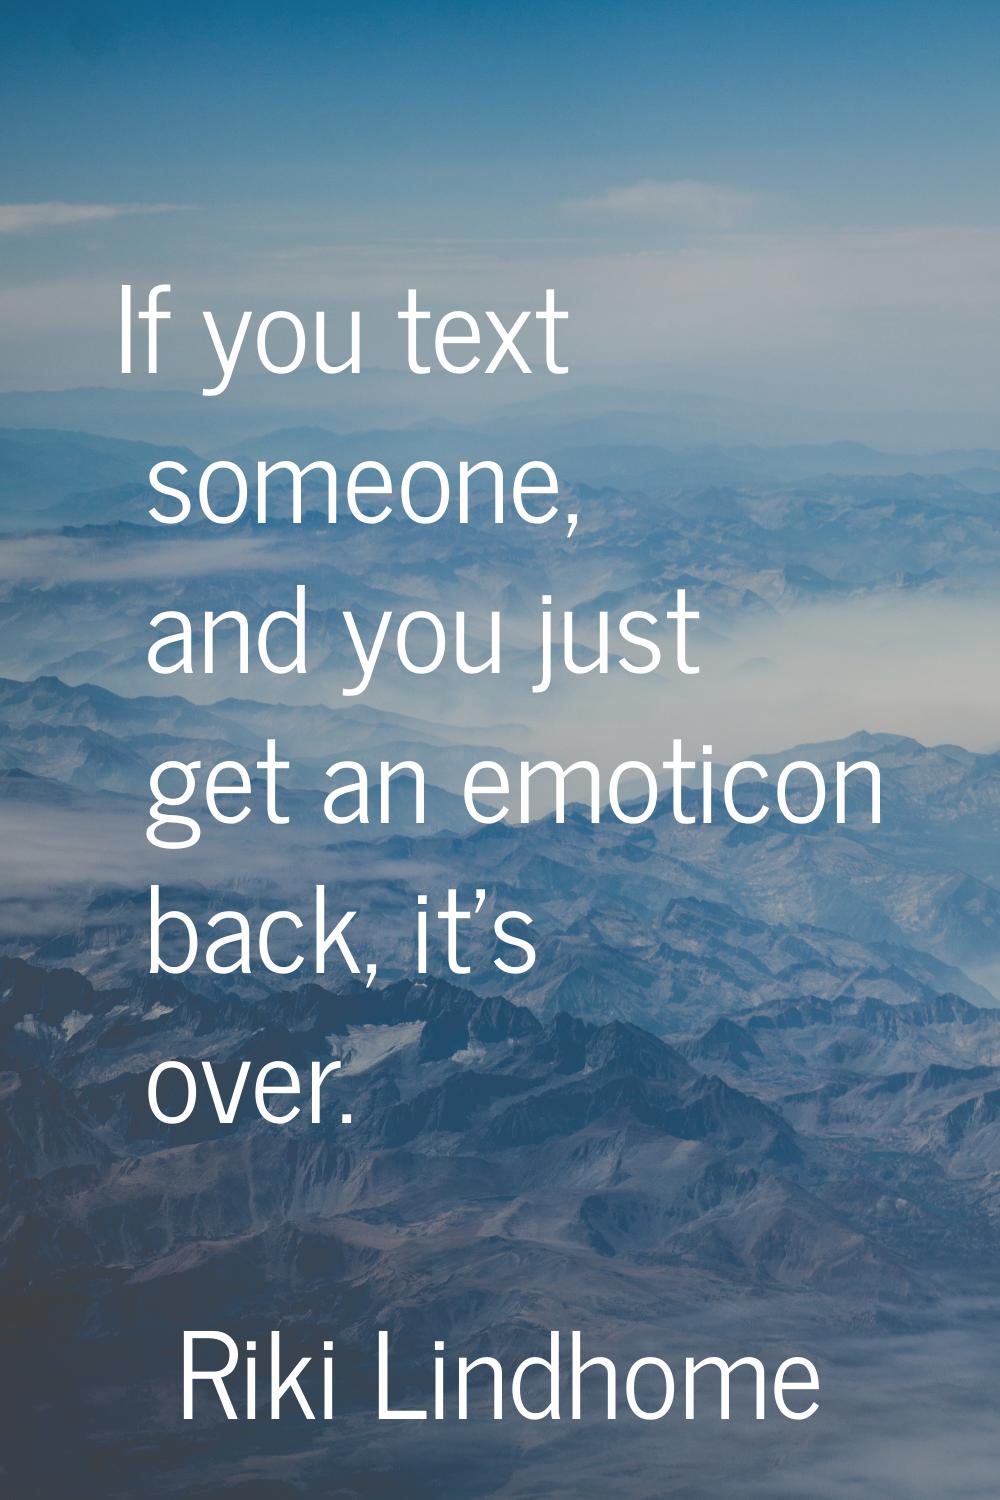 If you text someone, and you just get an emoticon back, it's over.